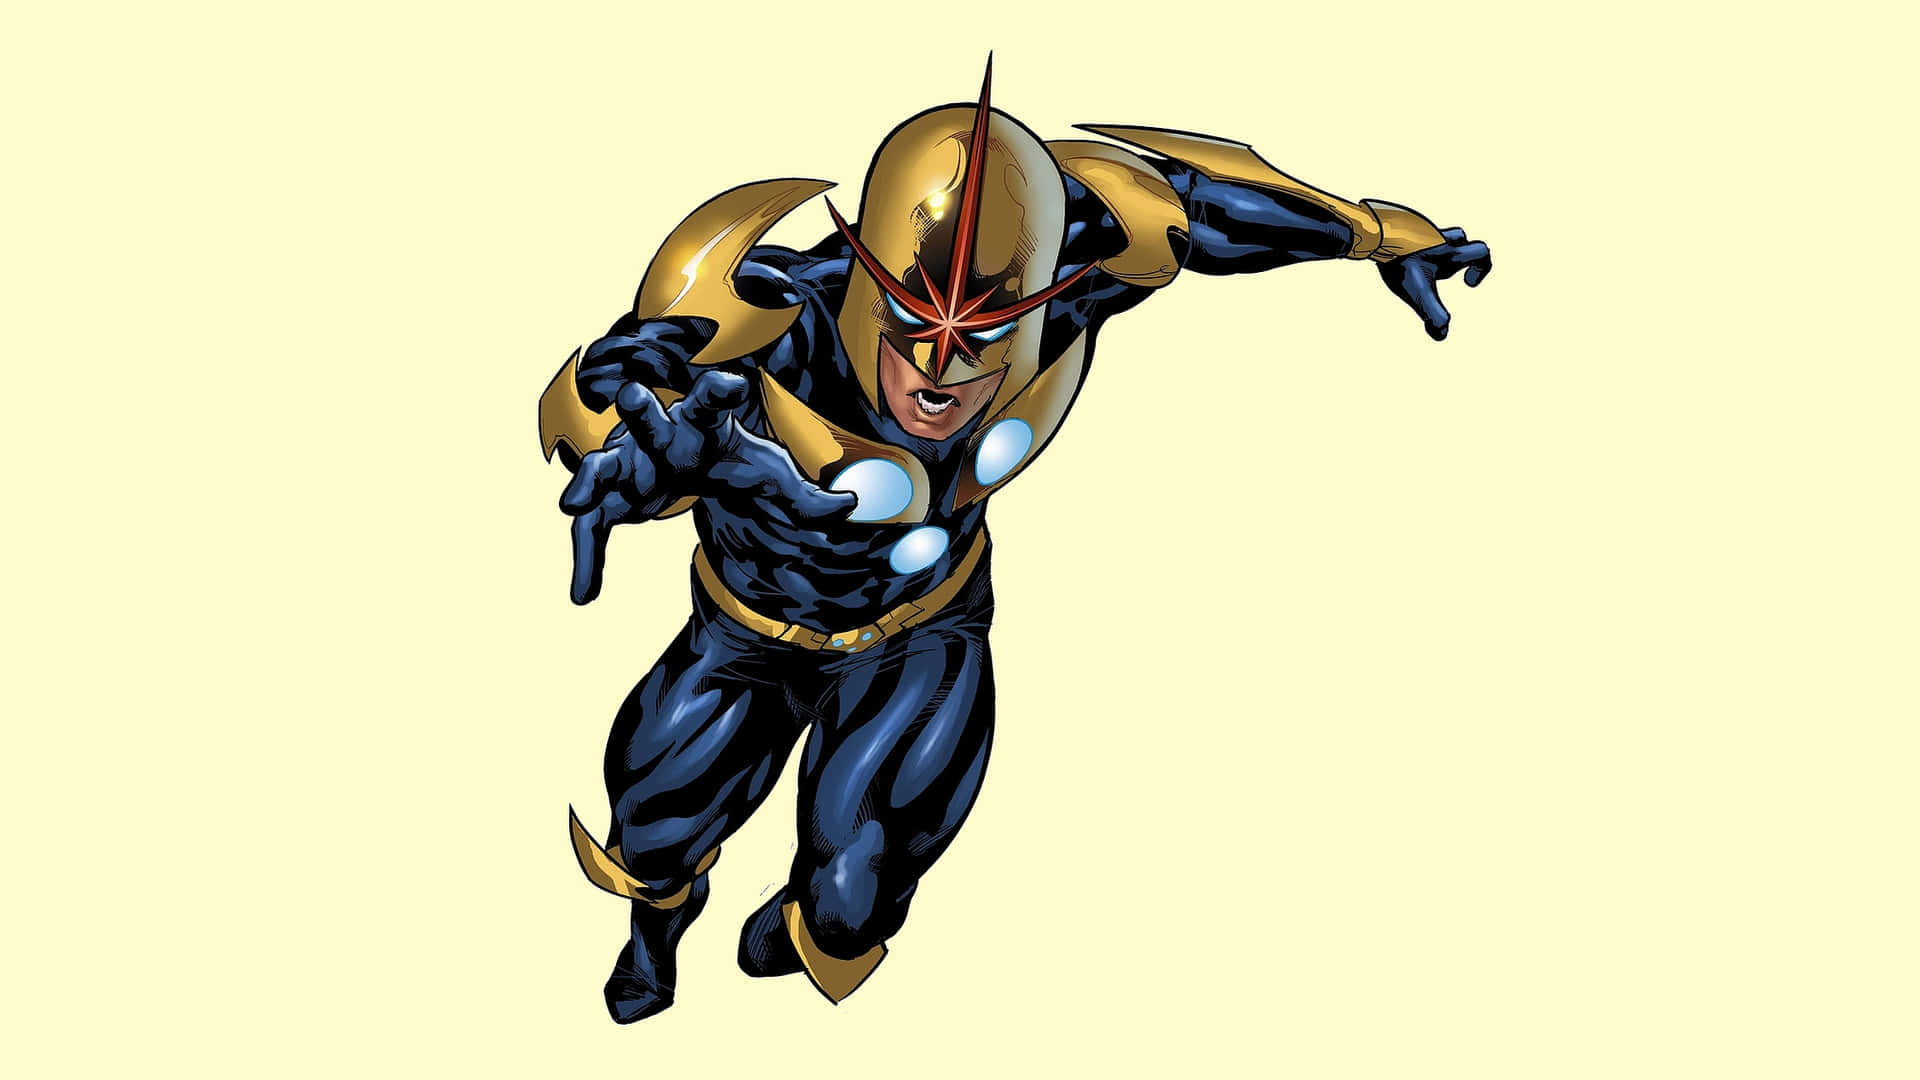 The powerful Nova Corps protecting our universe!" Wallpaper